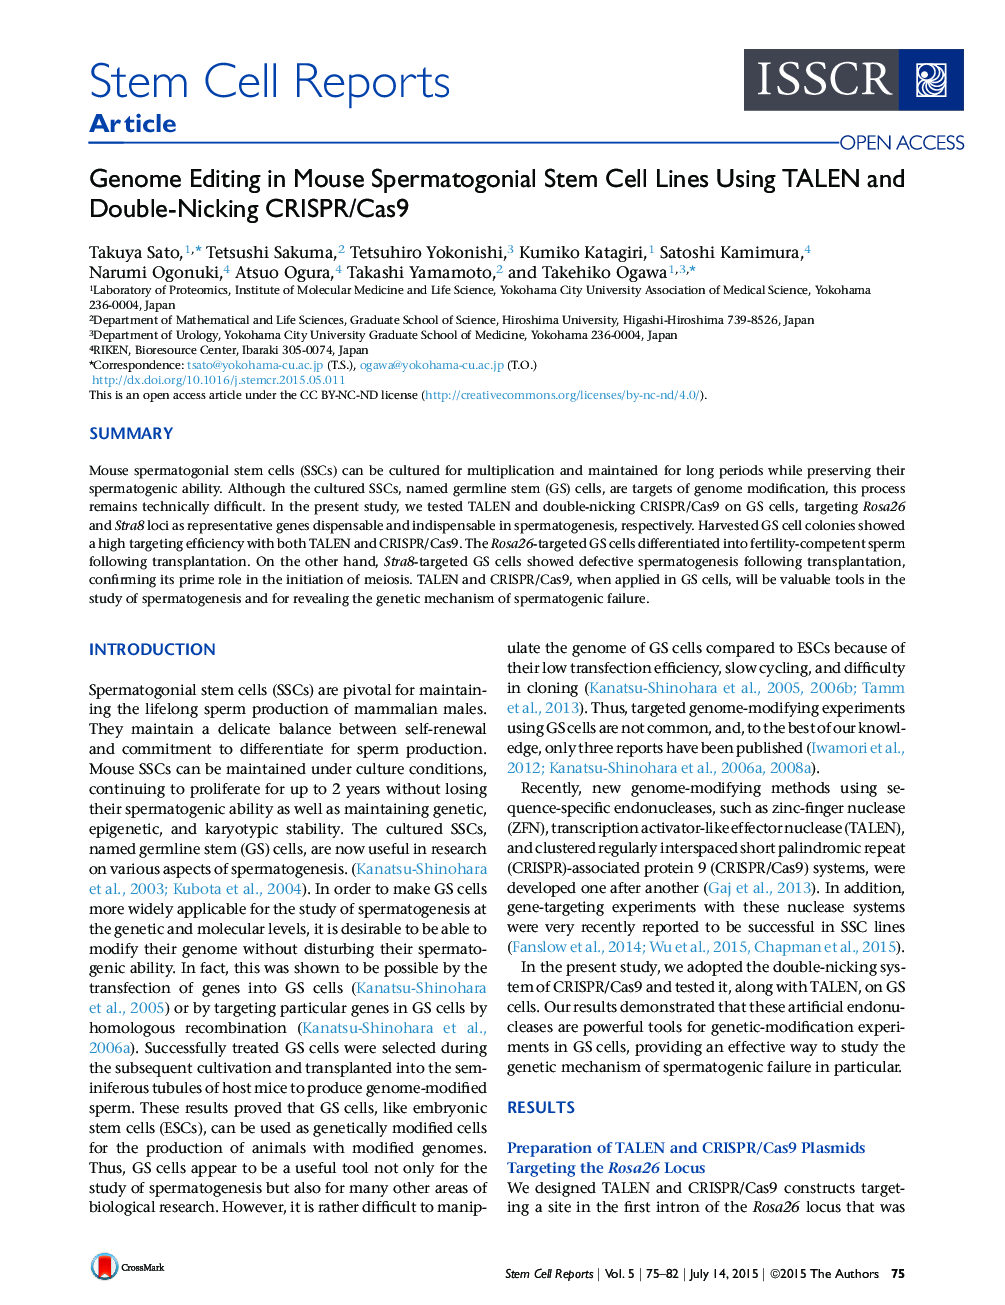 Genome Editing in Mouse Spermatogonial Stem Cell Lines Using TALEN and Double-Nicking CRISPR/Cas9 